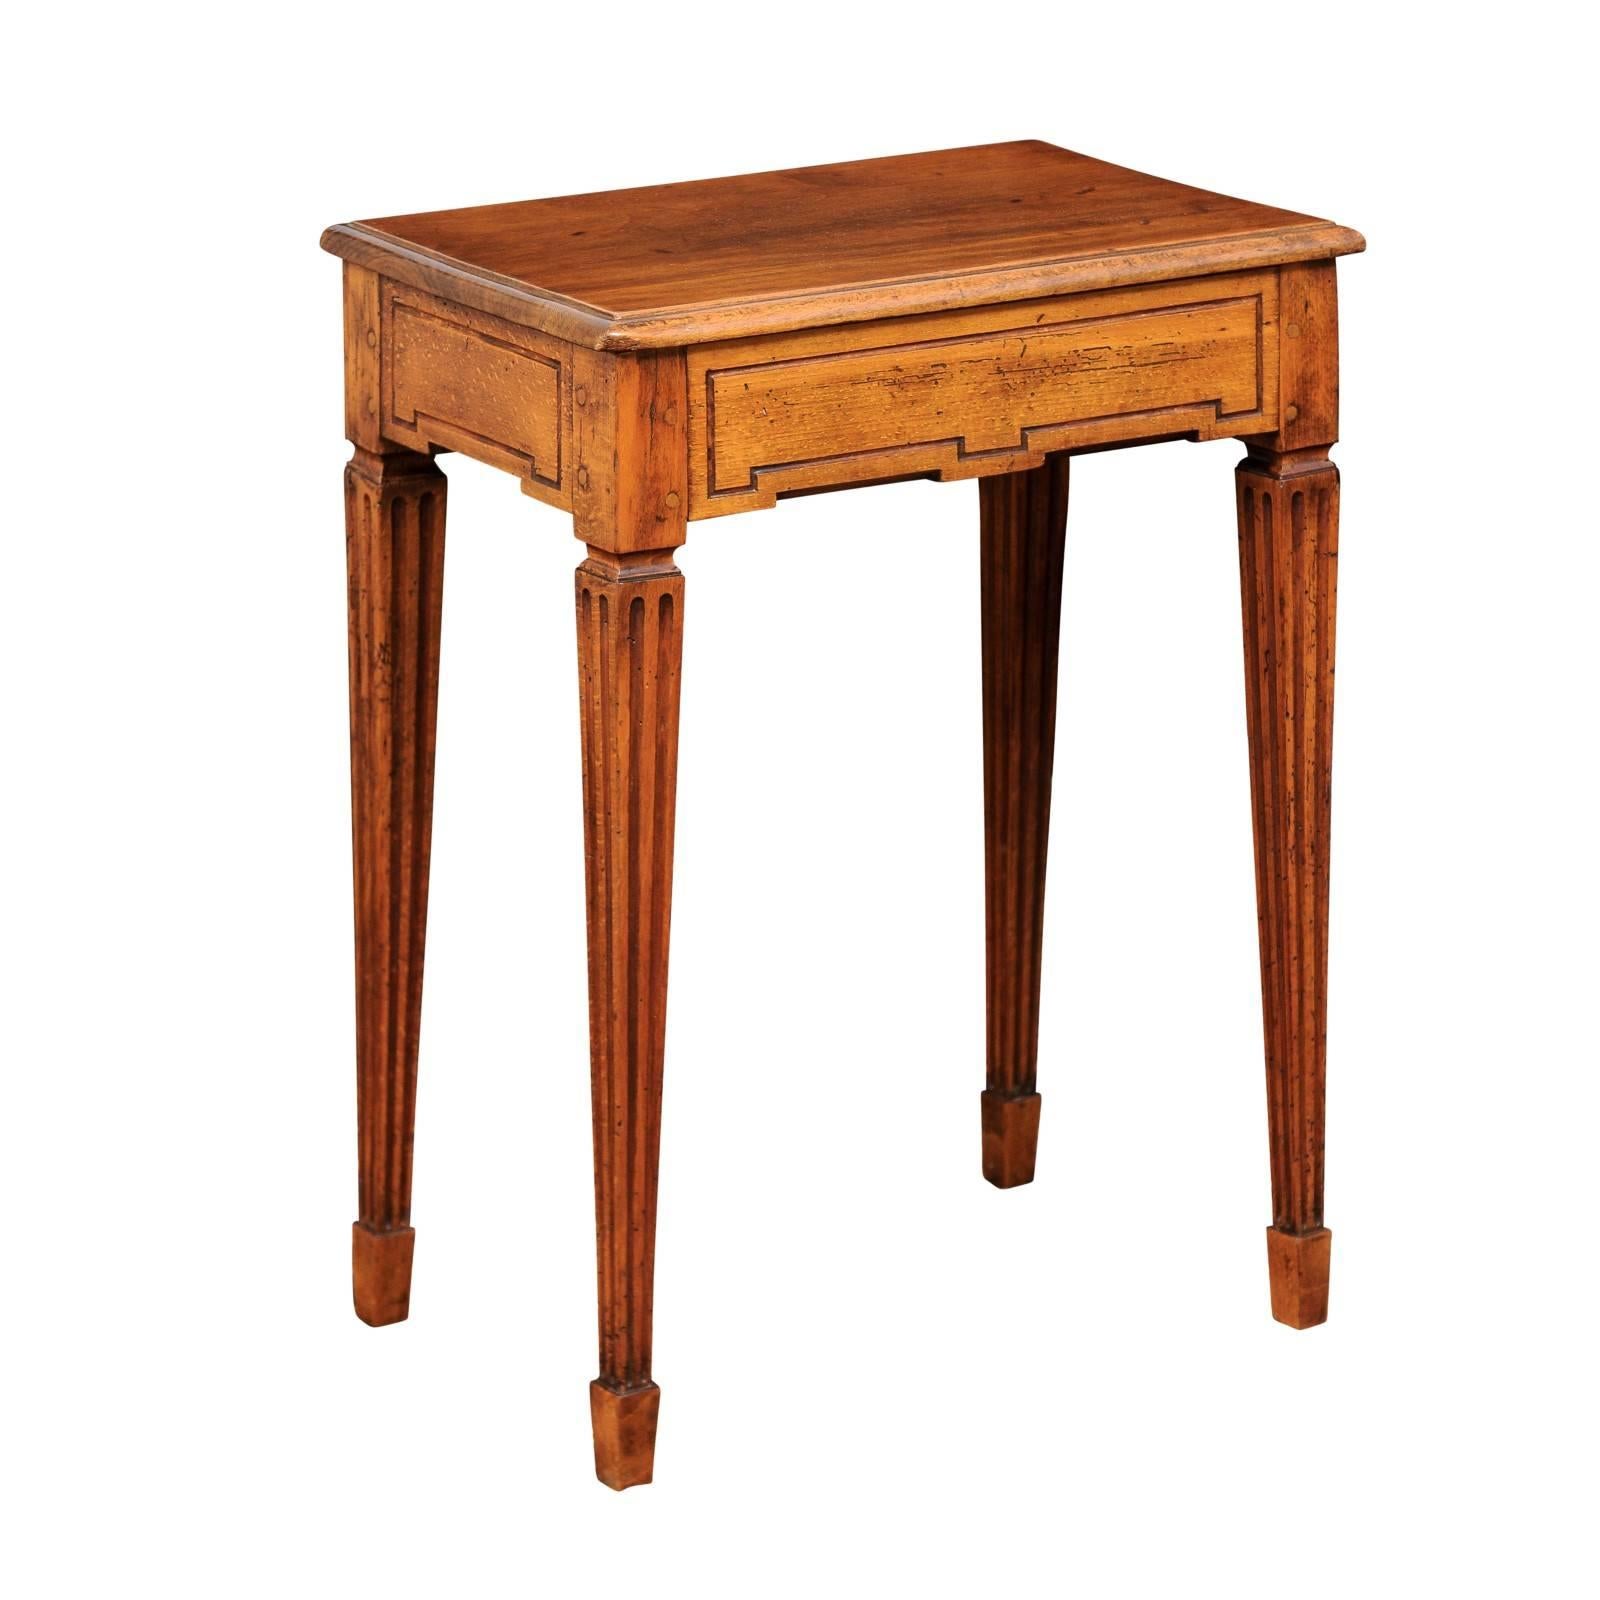 French Late 19th Century Oak and Walnut Side Table with Tilt-Top and Fluted Legs